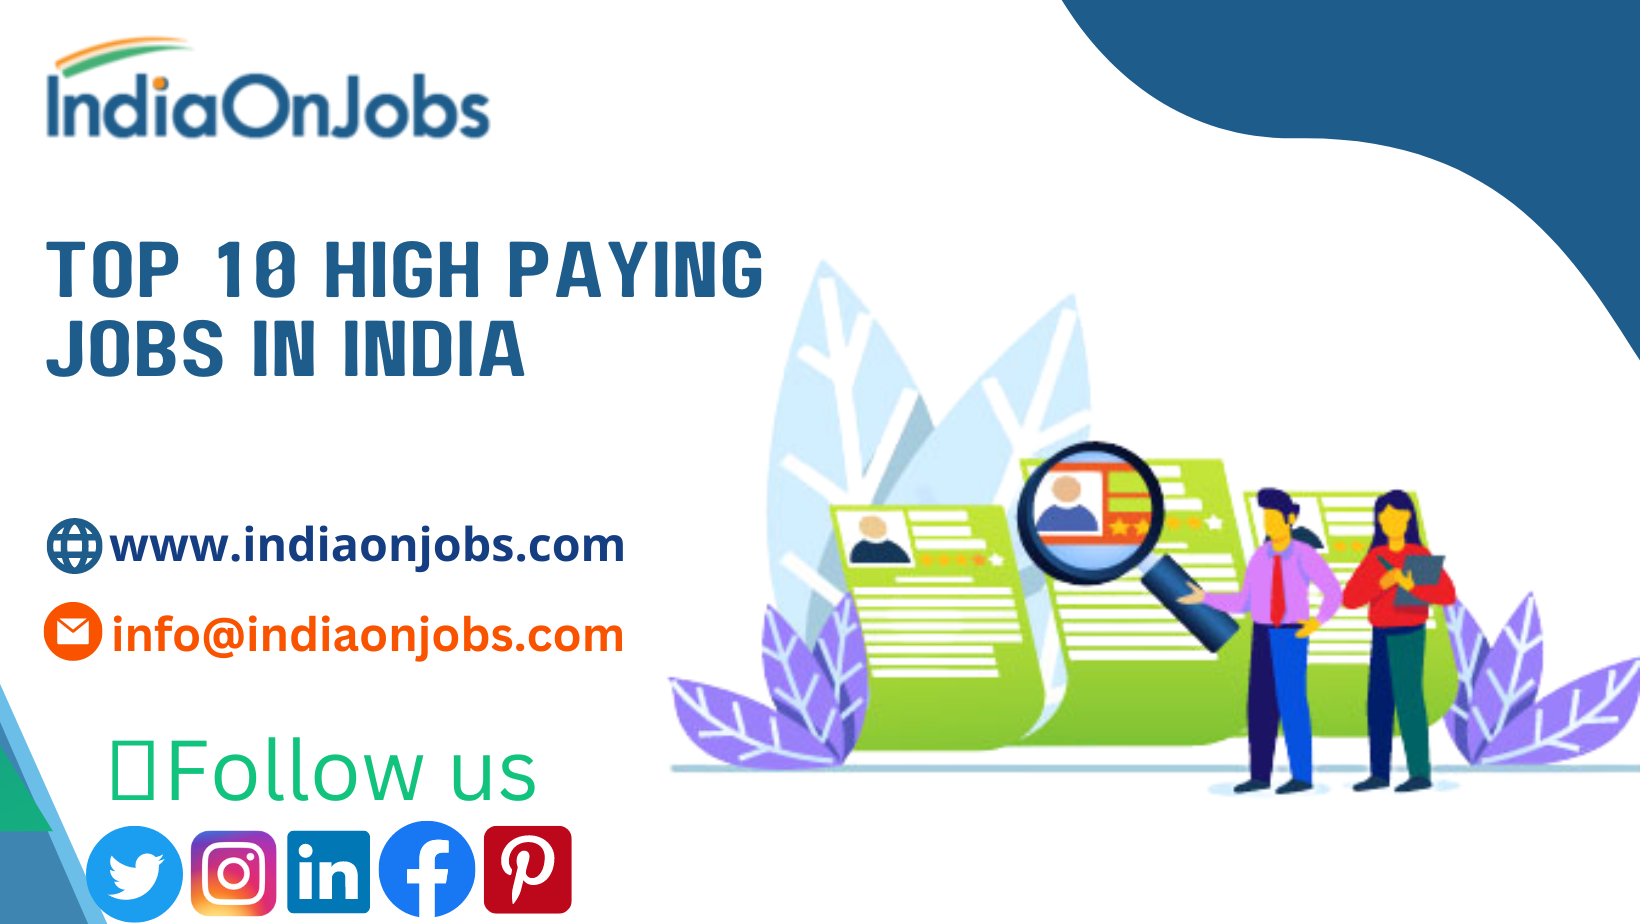 If you are looking for highest salary jobs, we have compiled a list of top 11 highest paying jobs in India to watch out for in 2023.